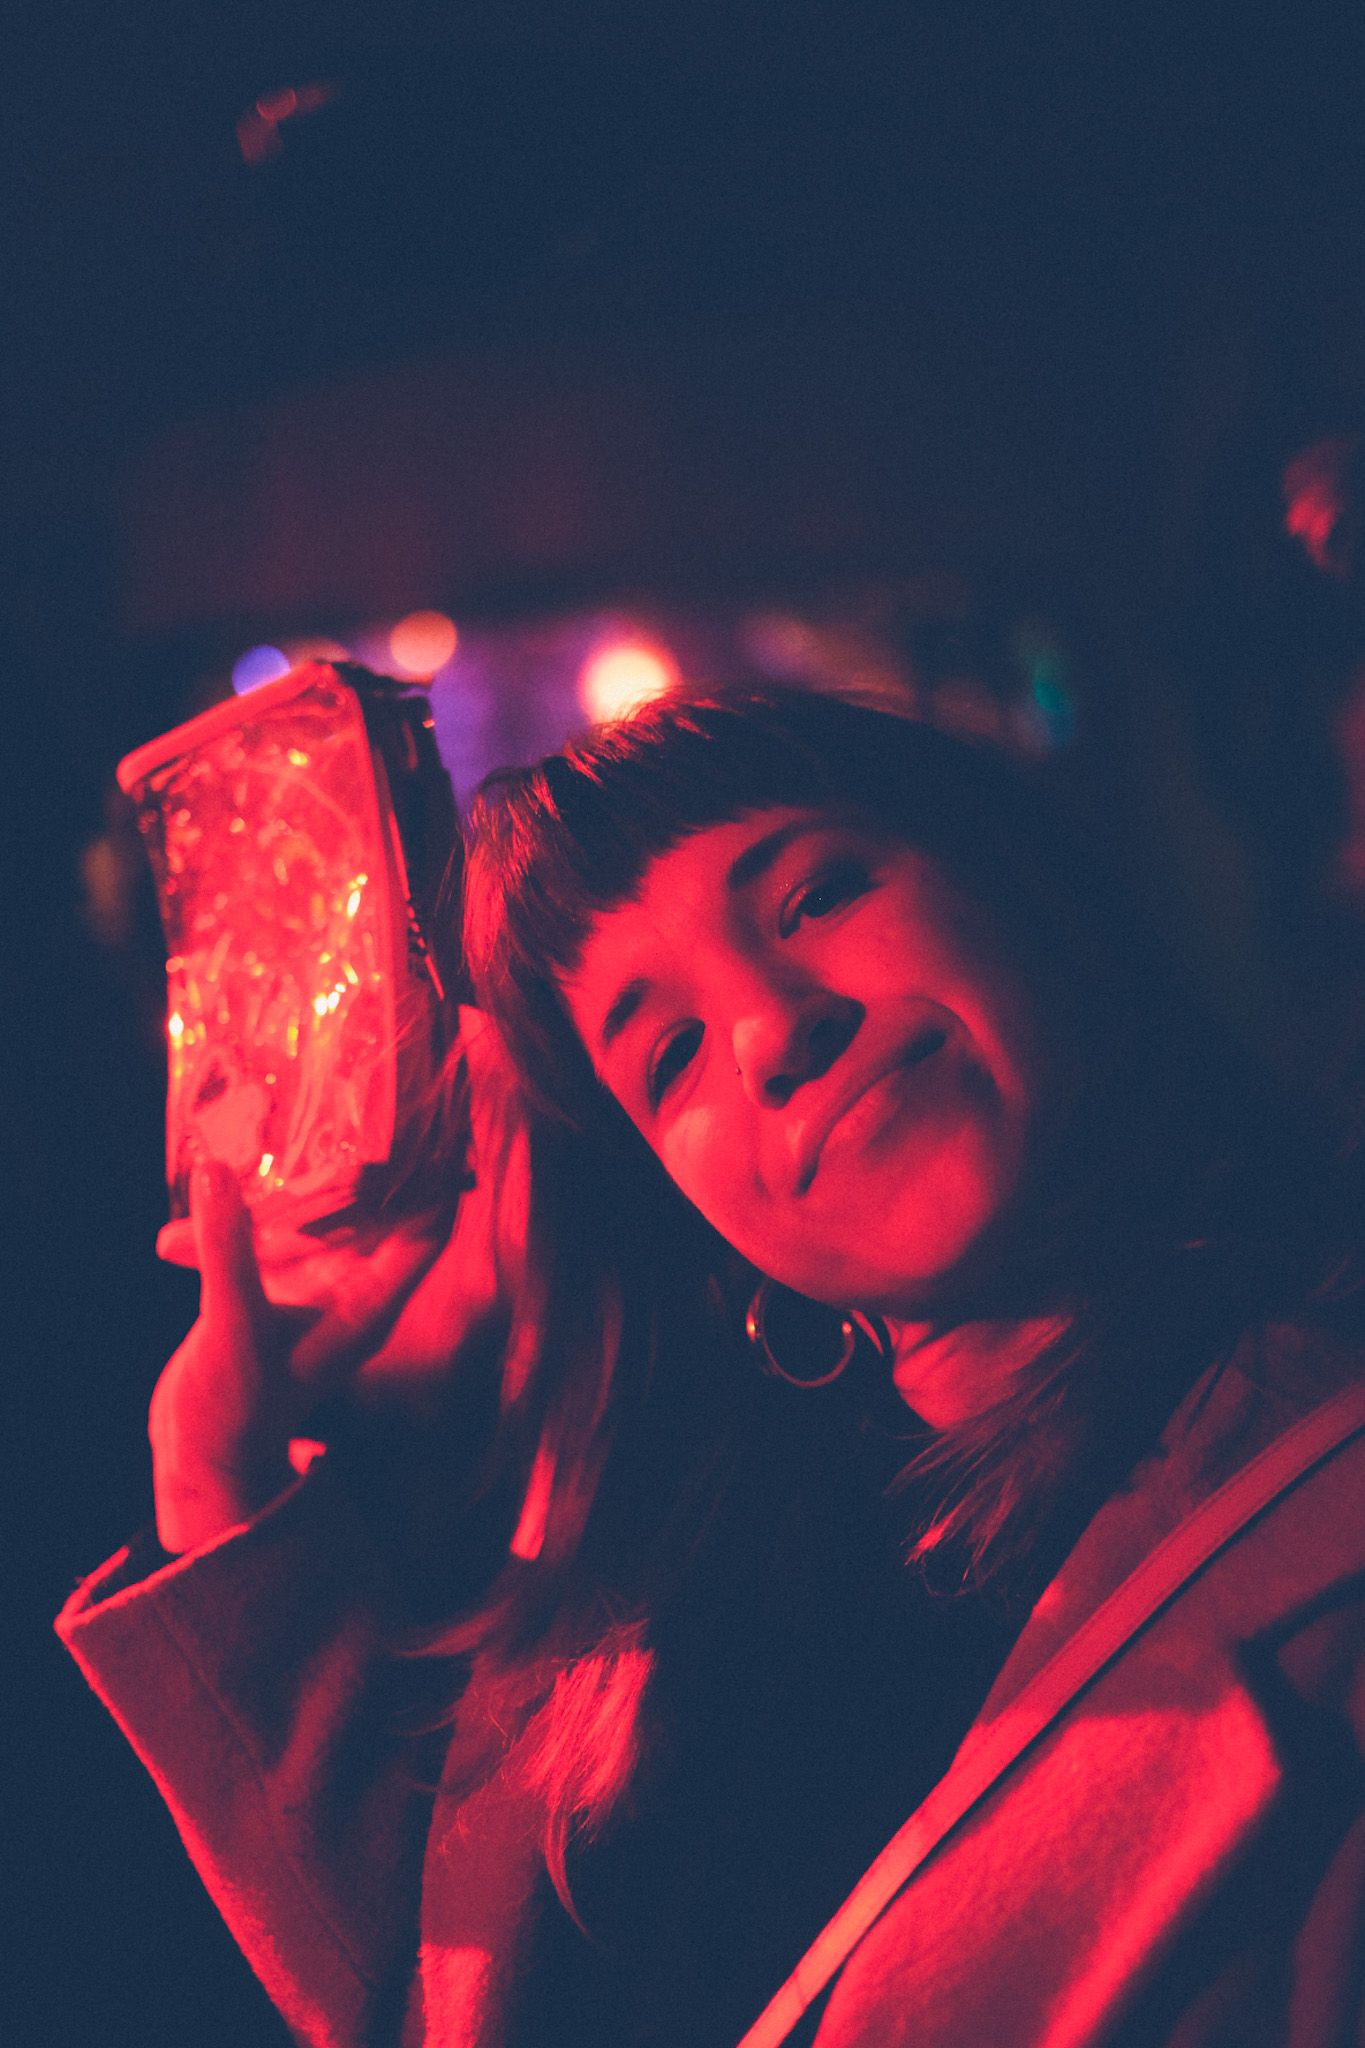 A woman saturated in red light holds a bag up, looking into the camera with attitude.